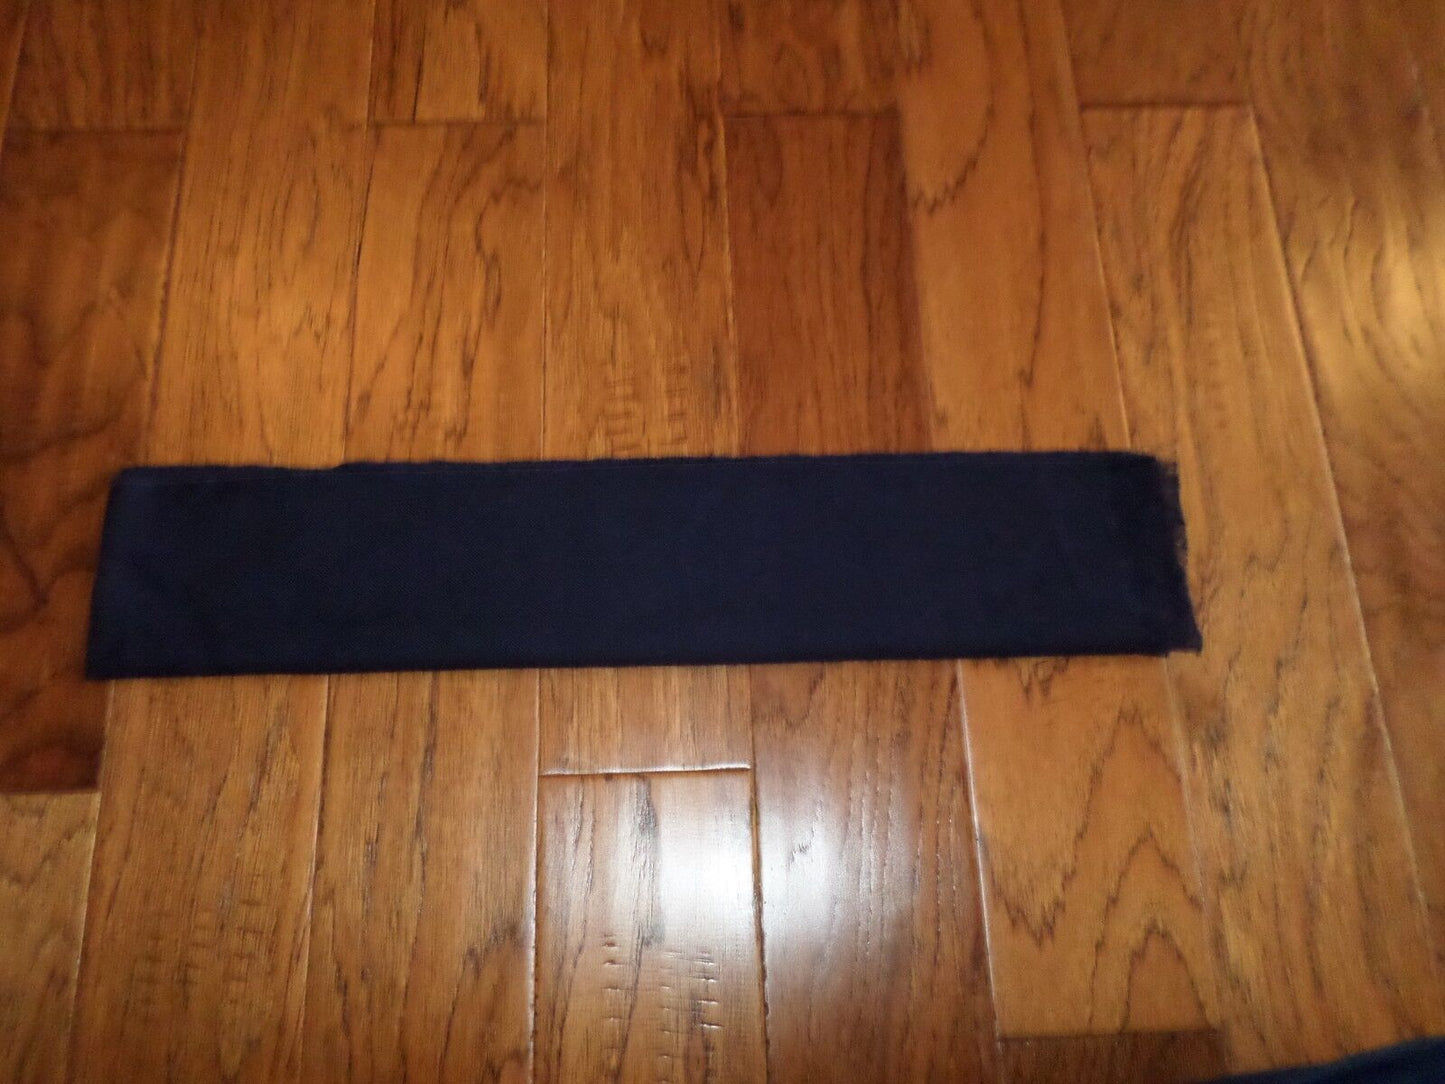 AIR FORCE SCARF BLUE 100% VIRGIN WOOL COLD WEATHER MILITARY DRESS SCARVES